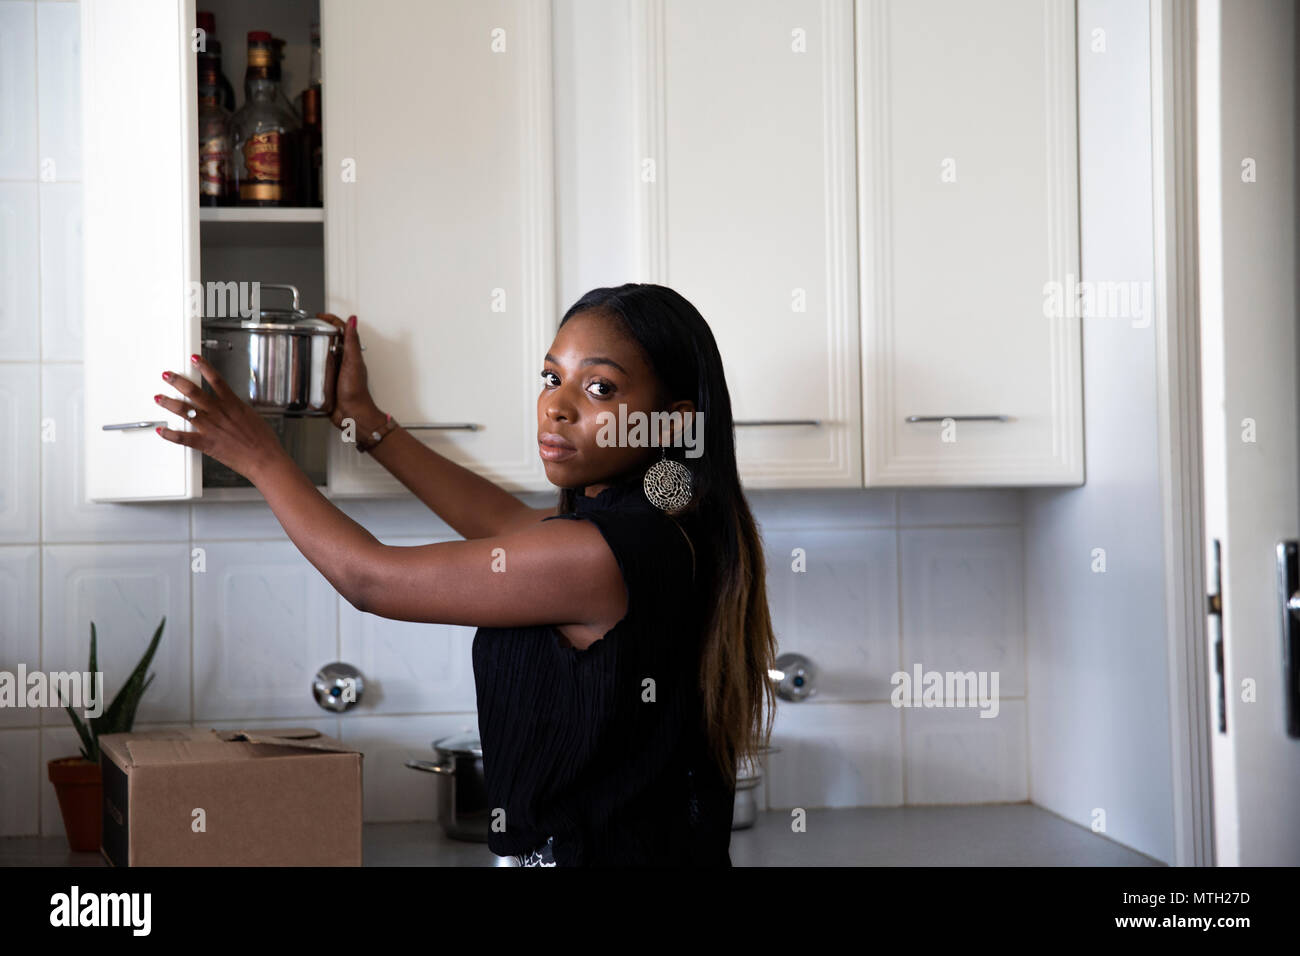 Woman putting pot into kitchen cupboard Stock Photo